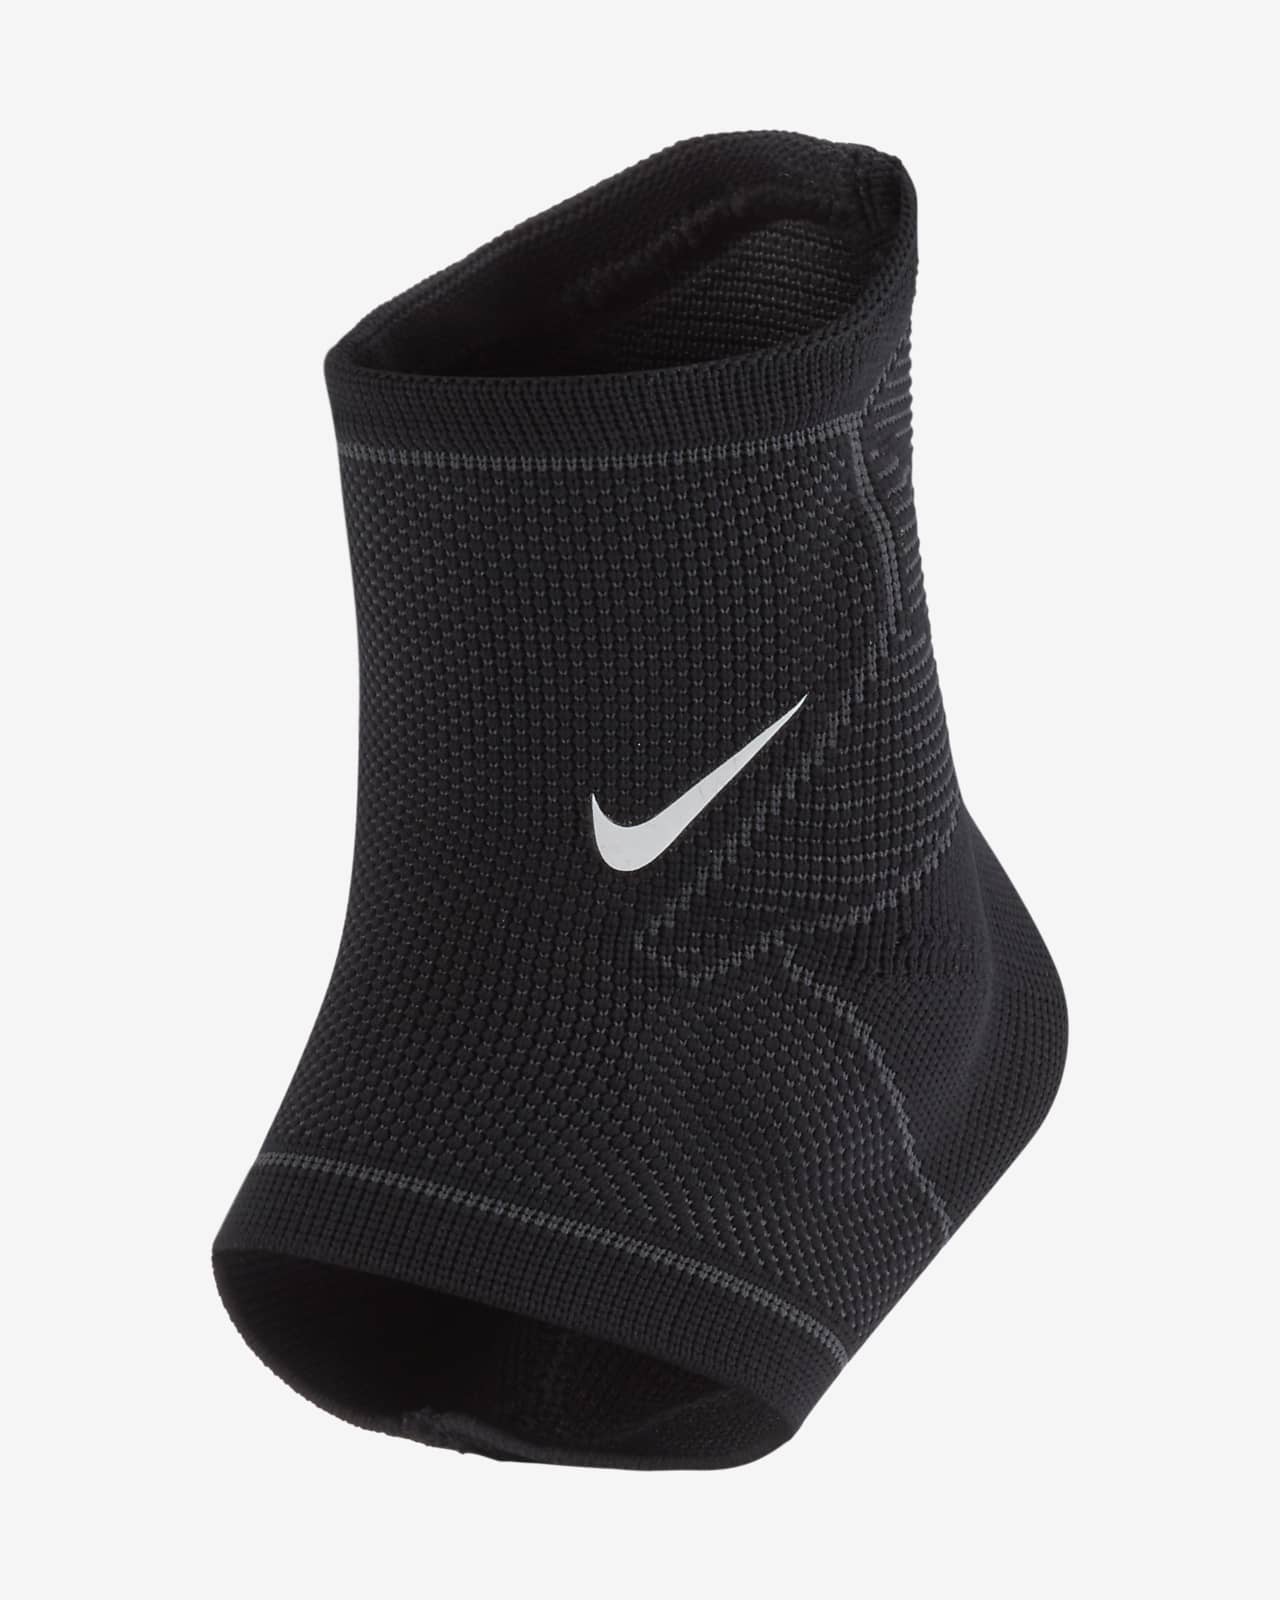 Nike Pro Knitted Ankle Sleeve.